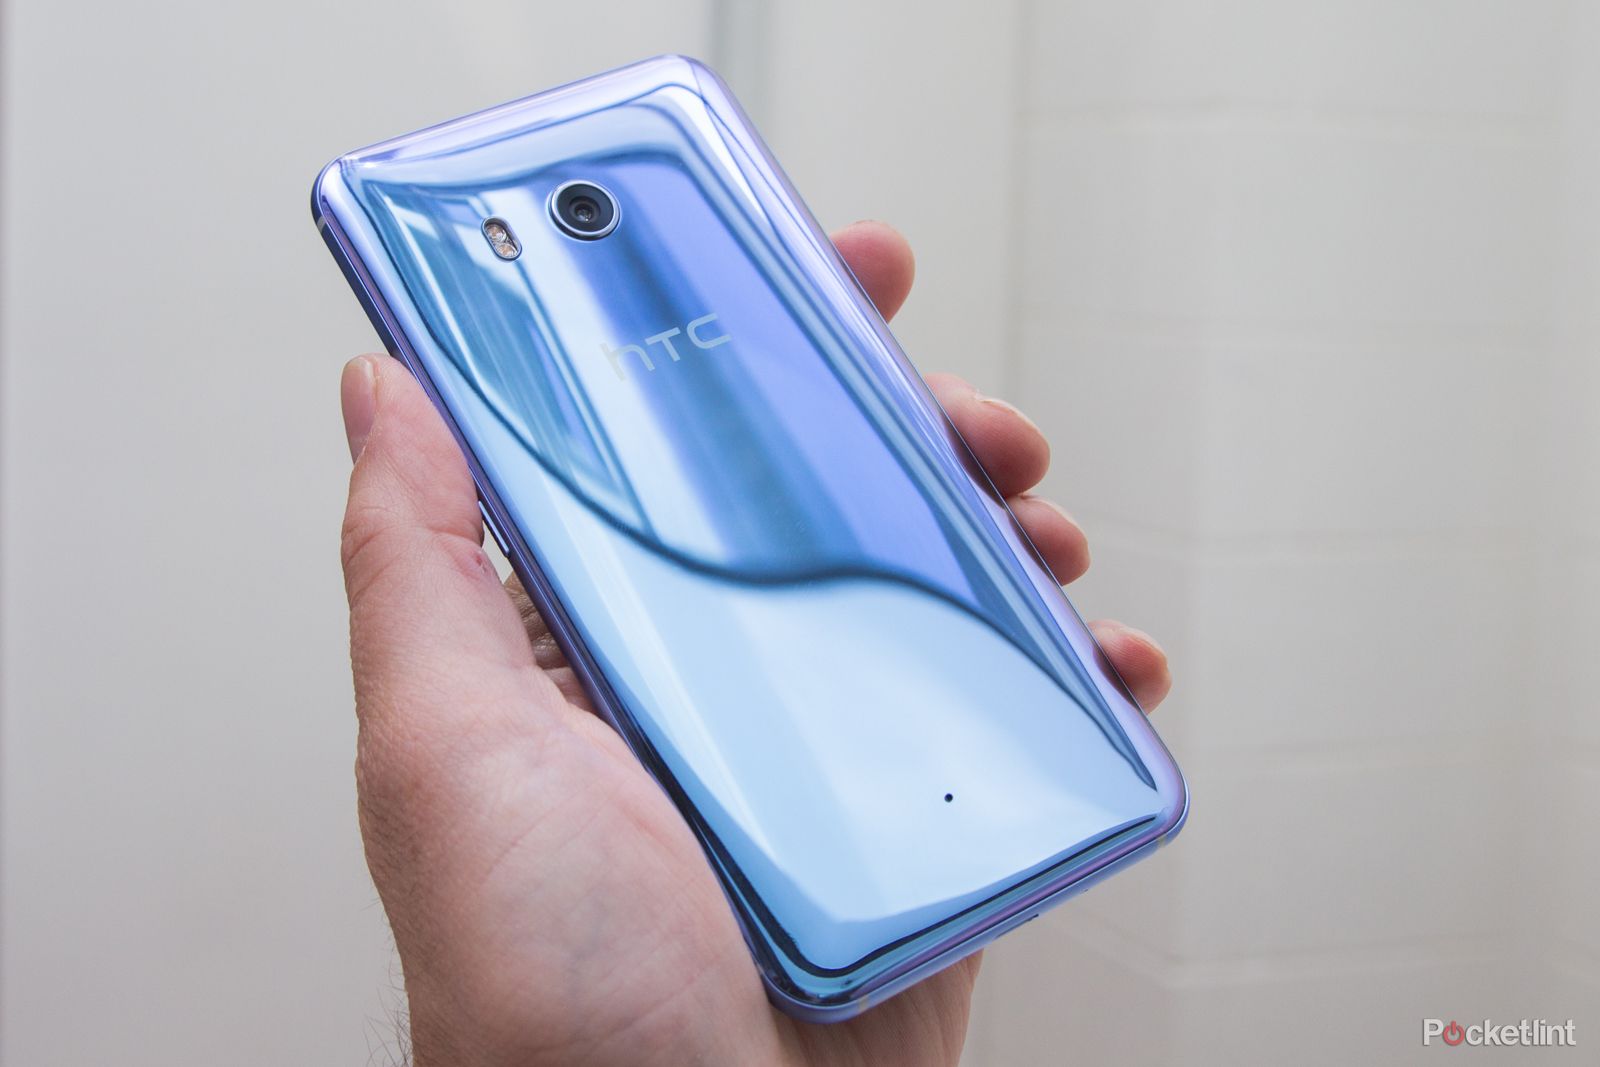 htc u11 release date specs and everything you need to know image 4